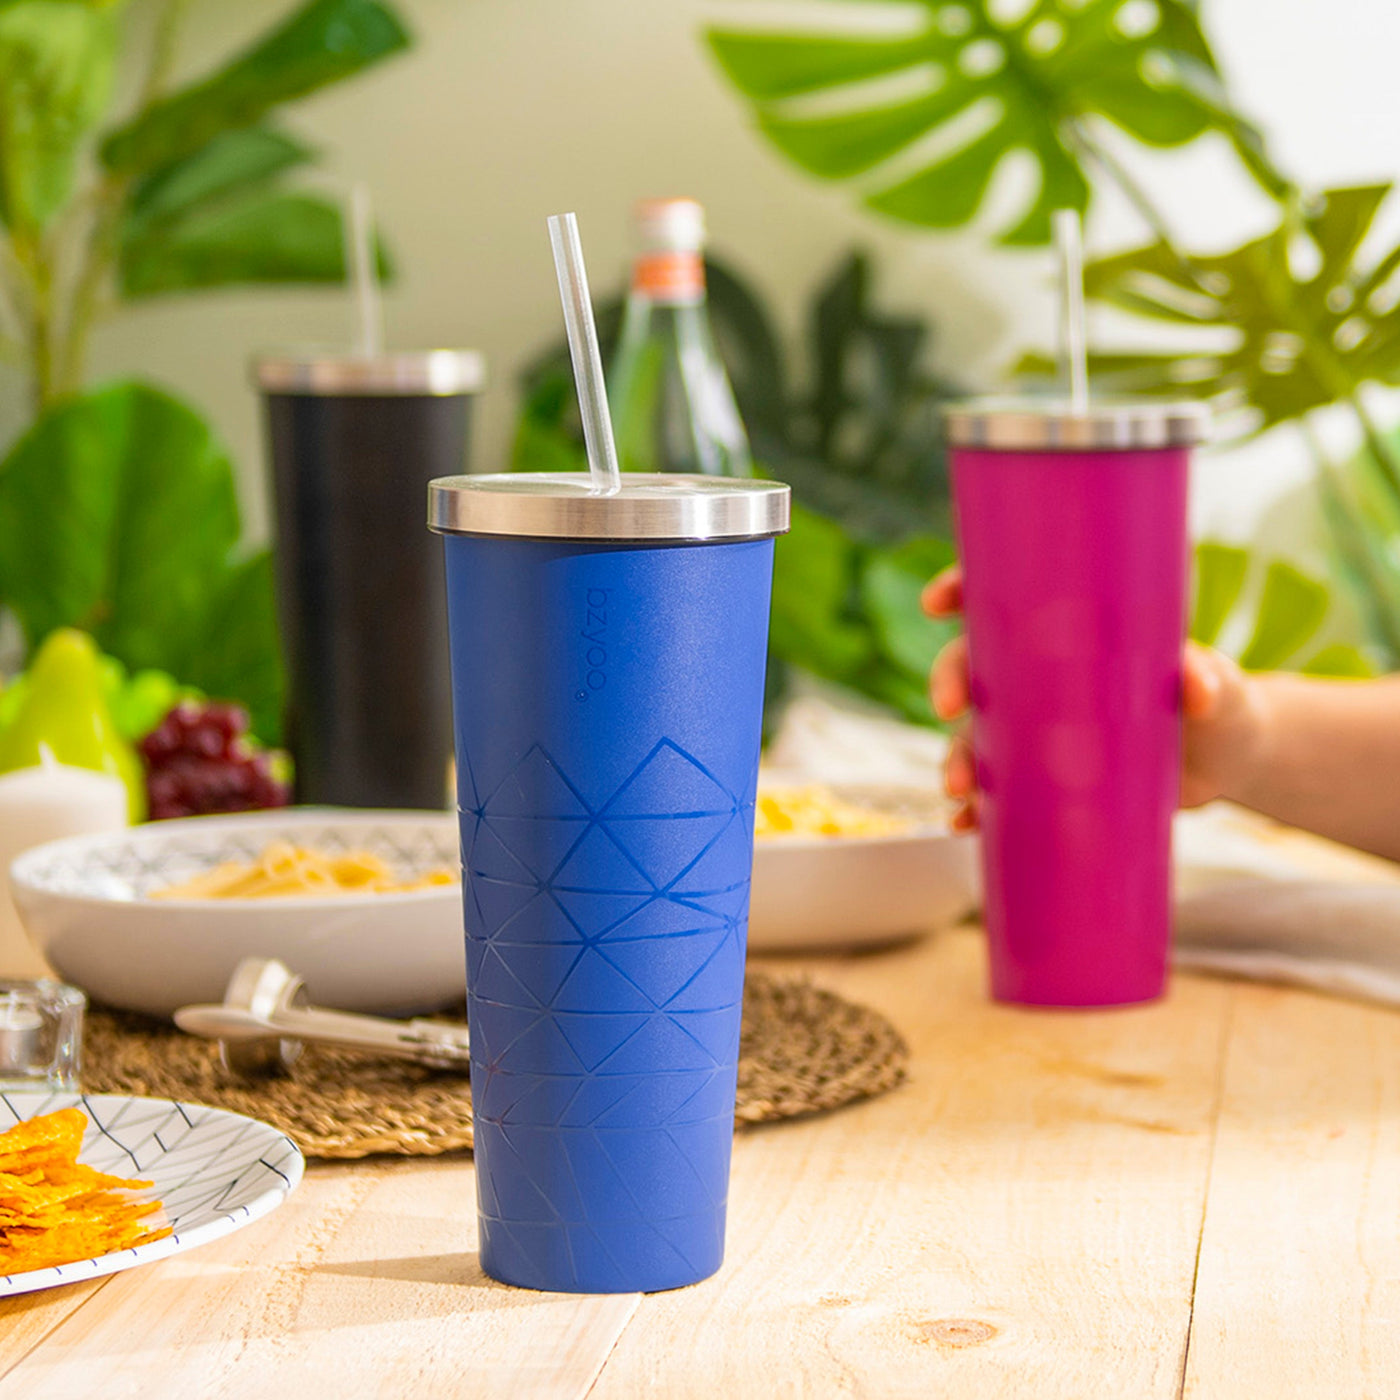 24oz SUP Double Wall Vacuum Insulated Stainless Steel Tumbler w/ Straw Lid - Spidy Blue